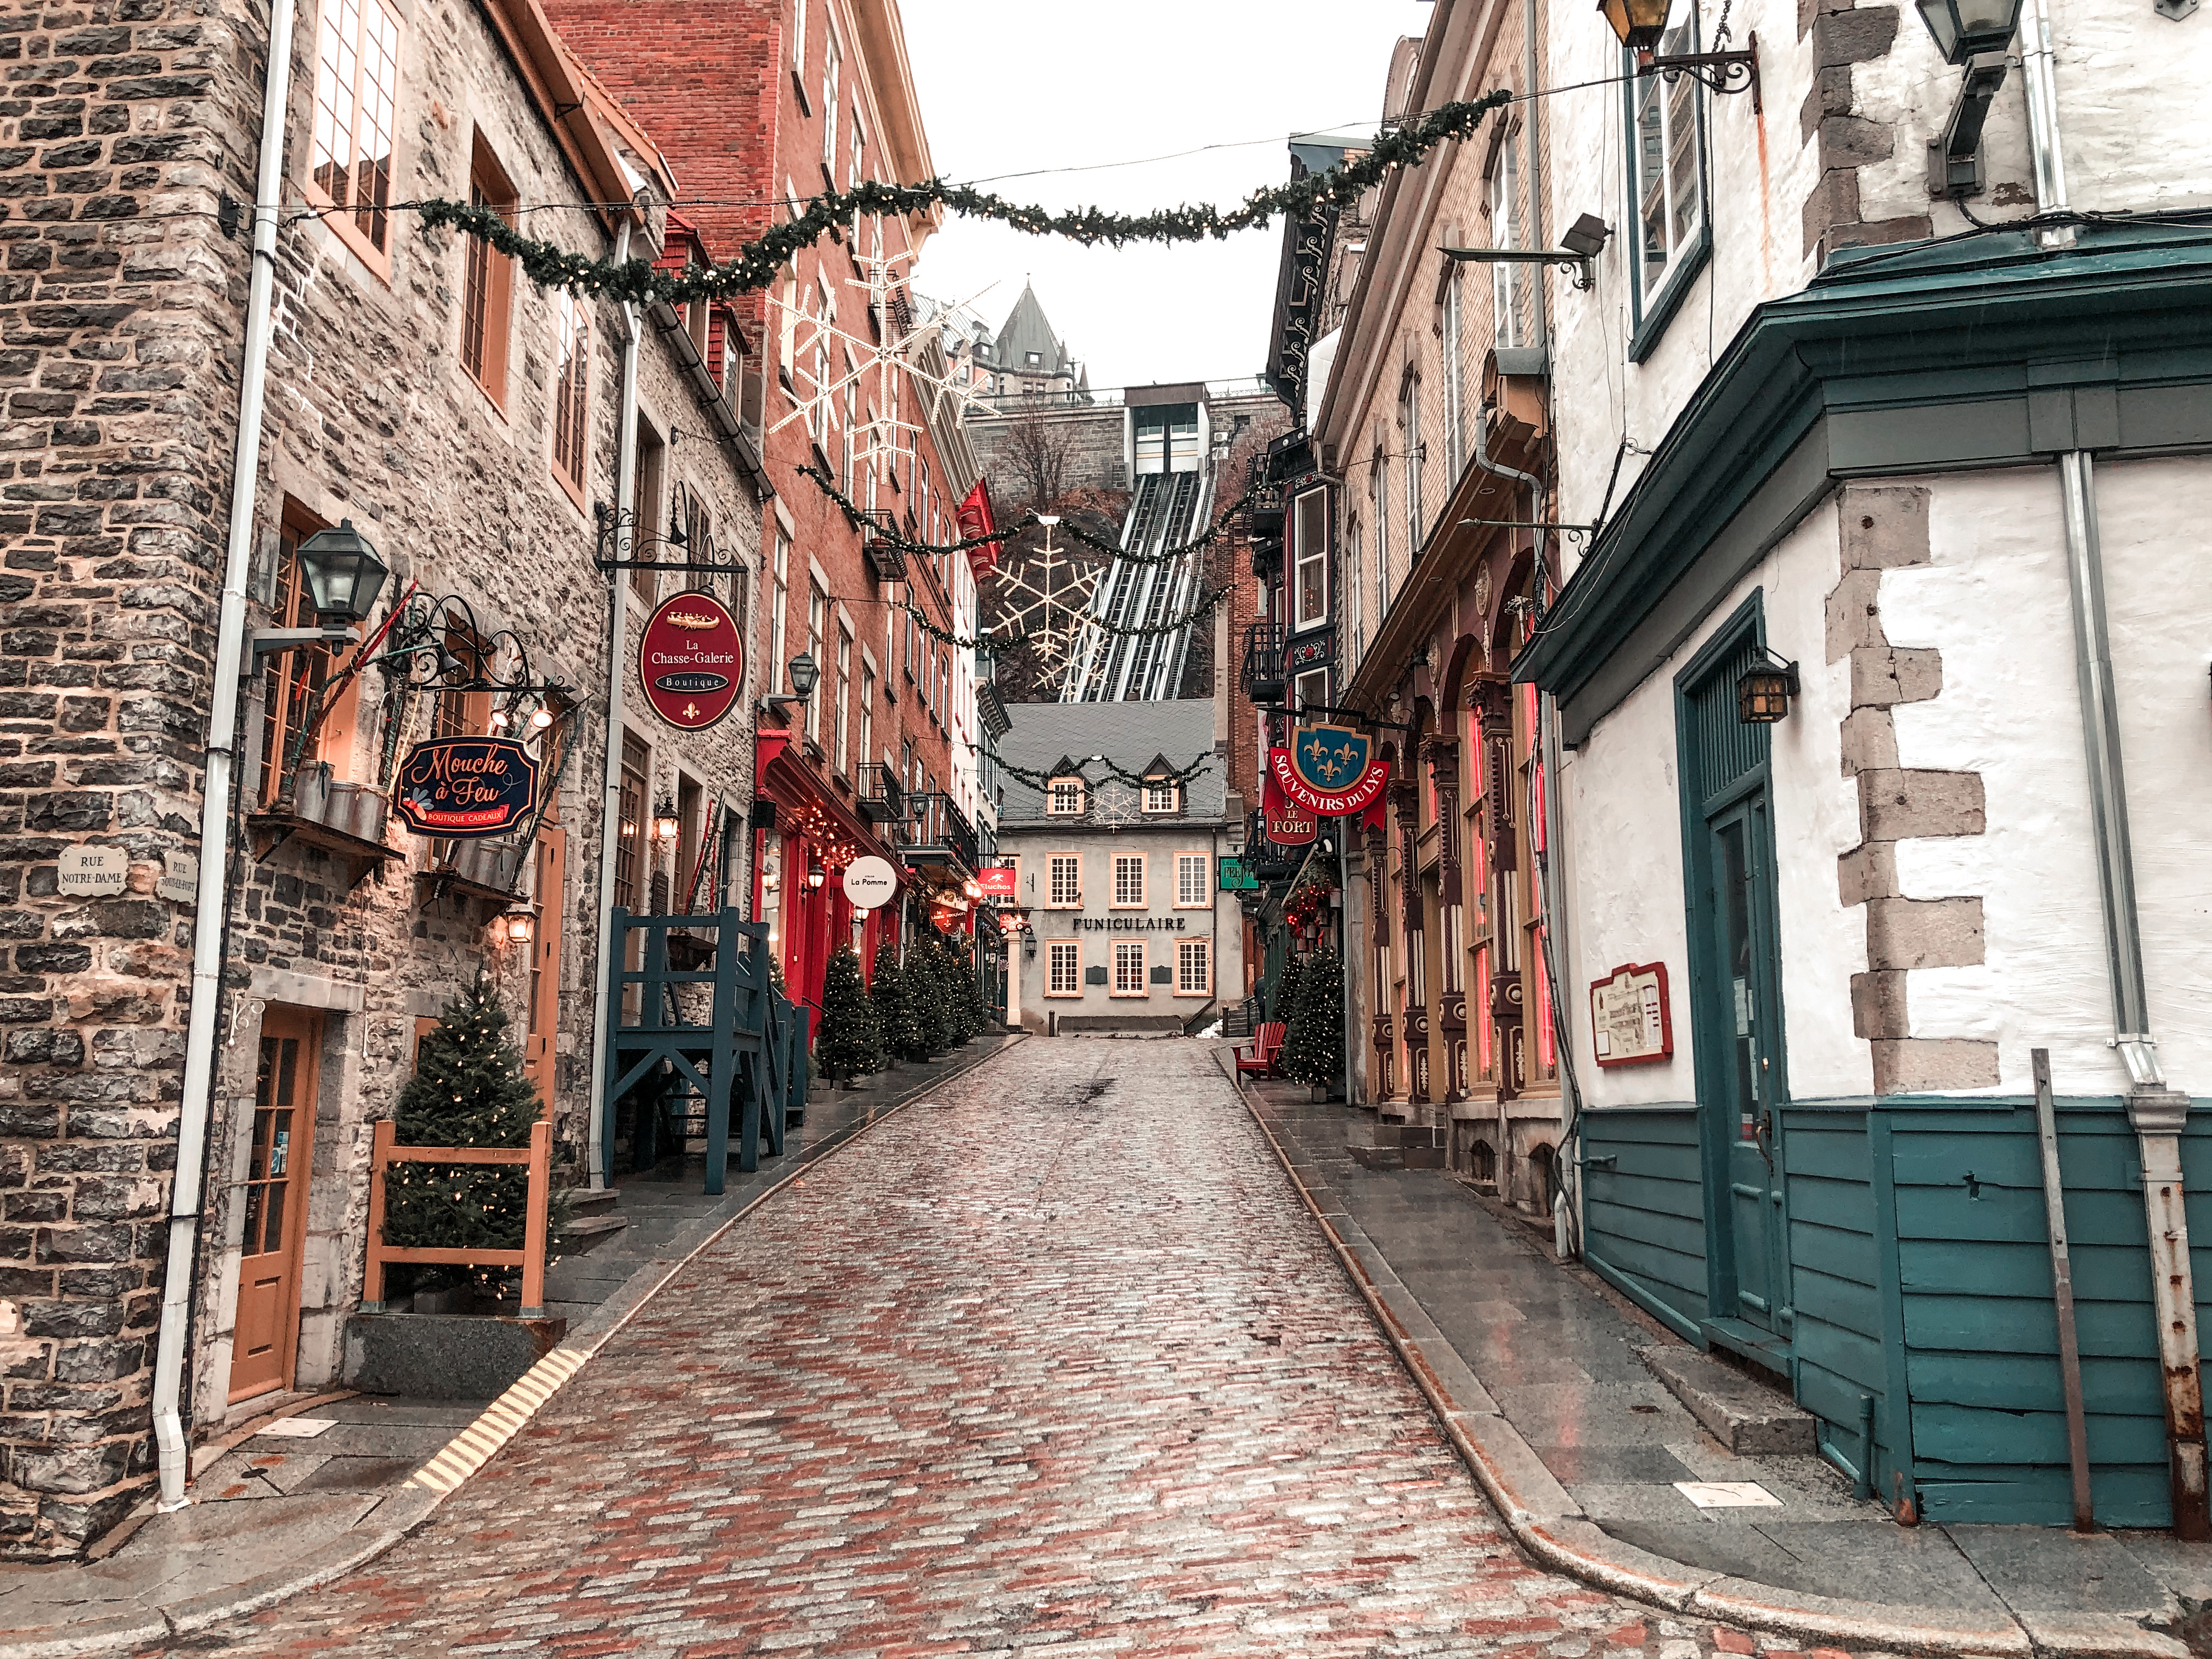 5-day Quebec City itinerary to get the most out of your trip